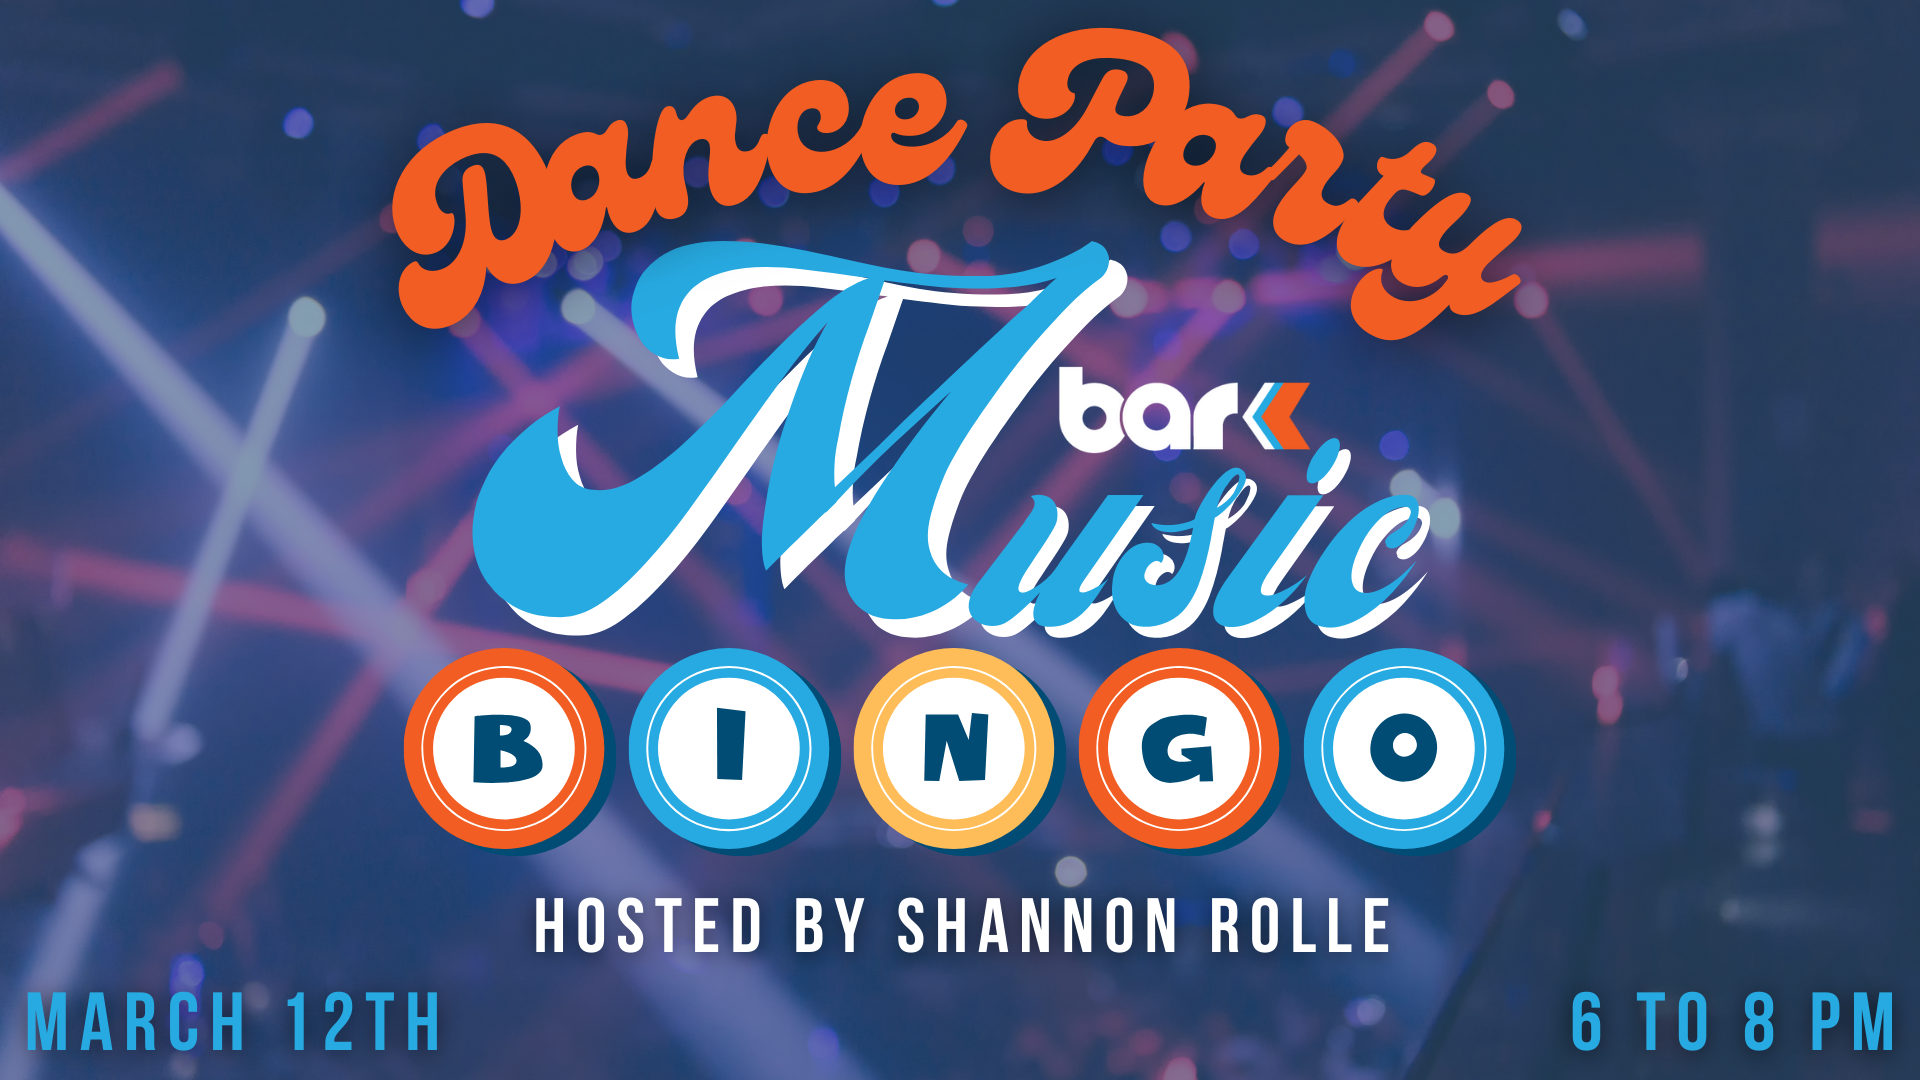 Dance Party Music bingo at Bar K hosted by Shannon Rolle. March 12th from 6 to 8 pm.